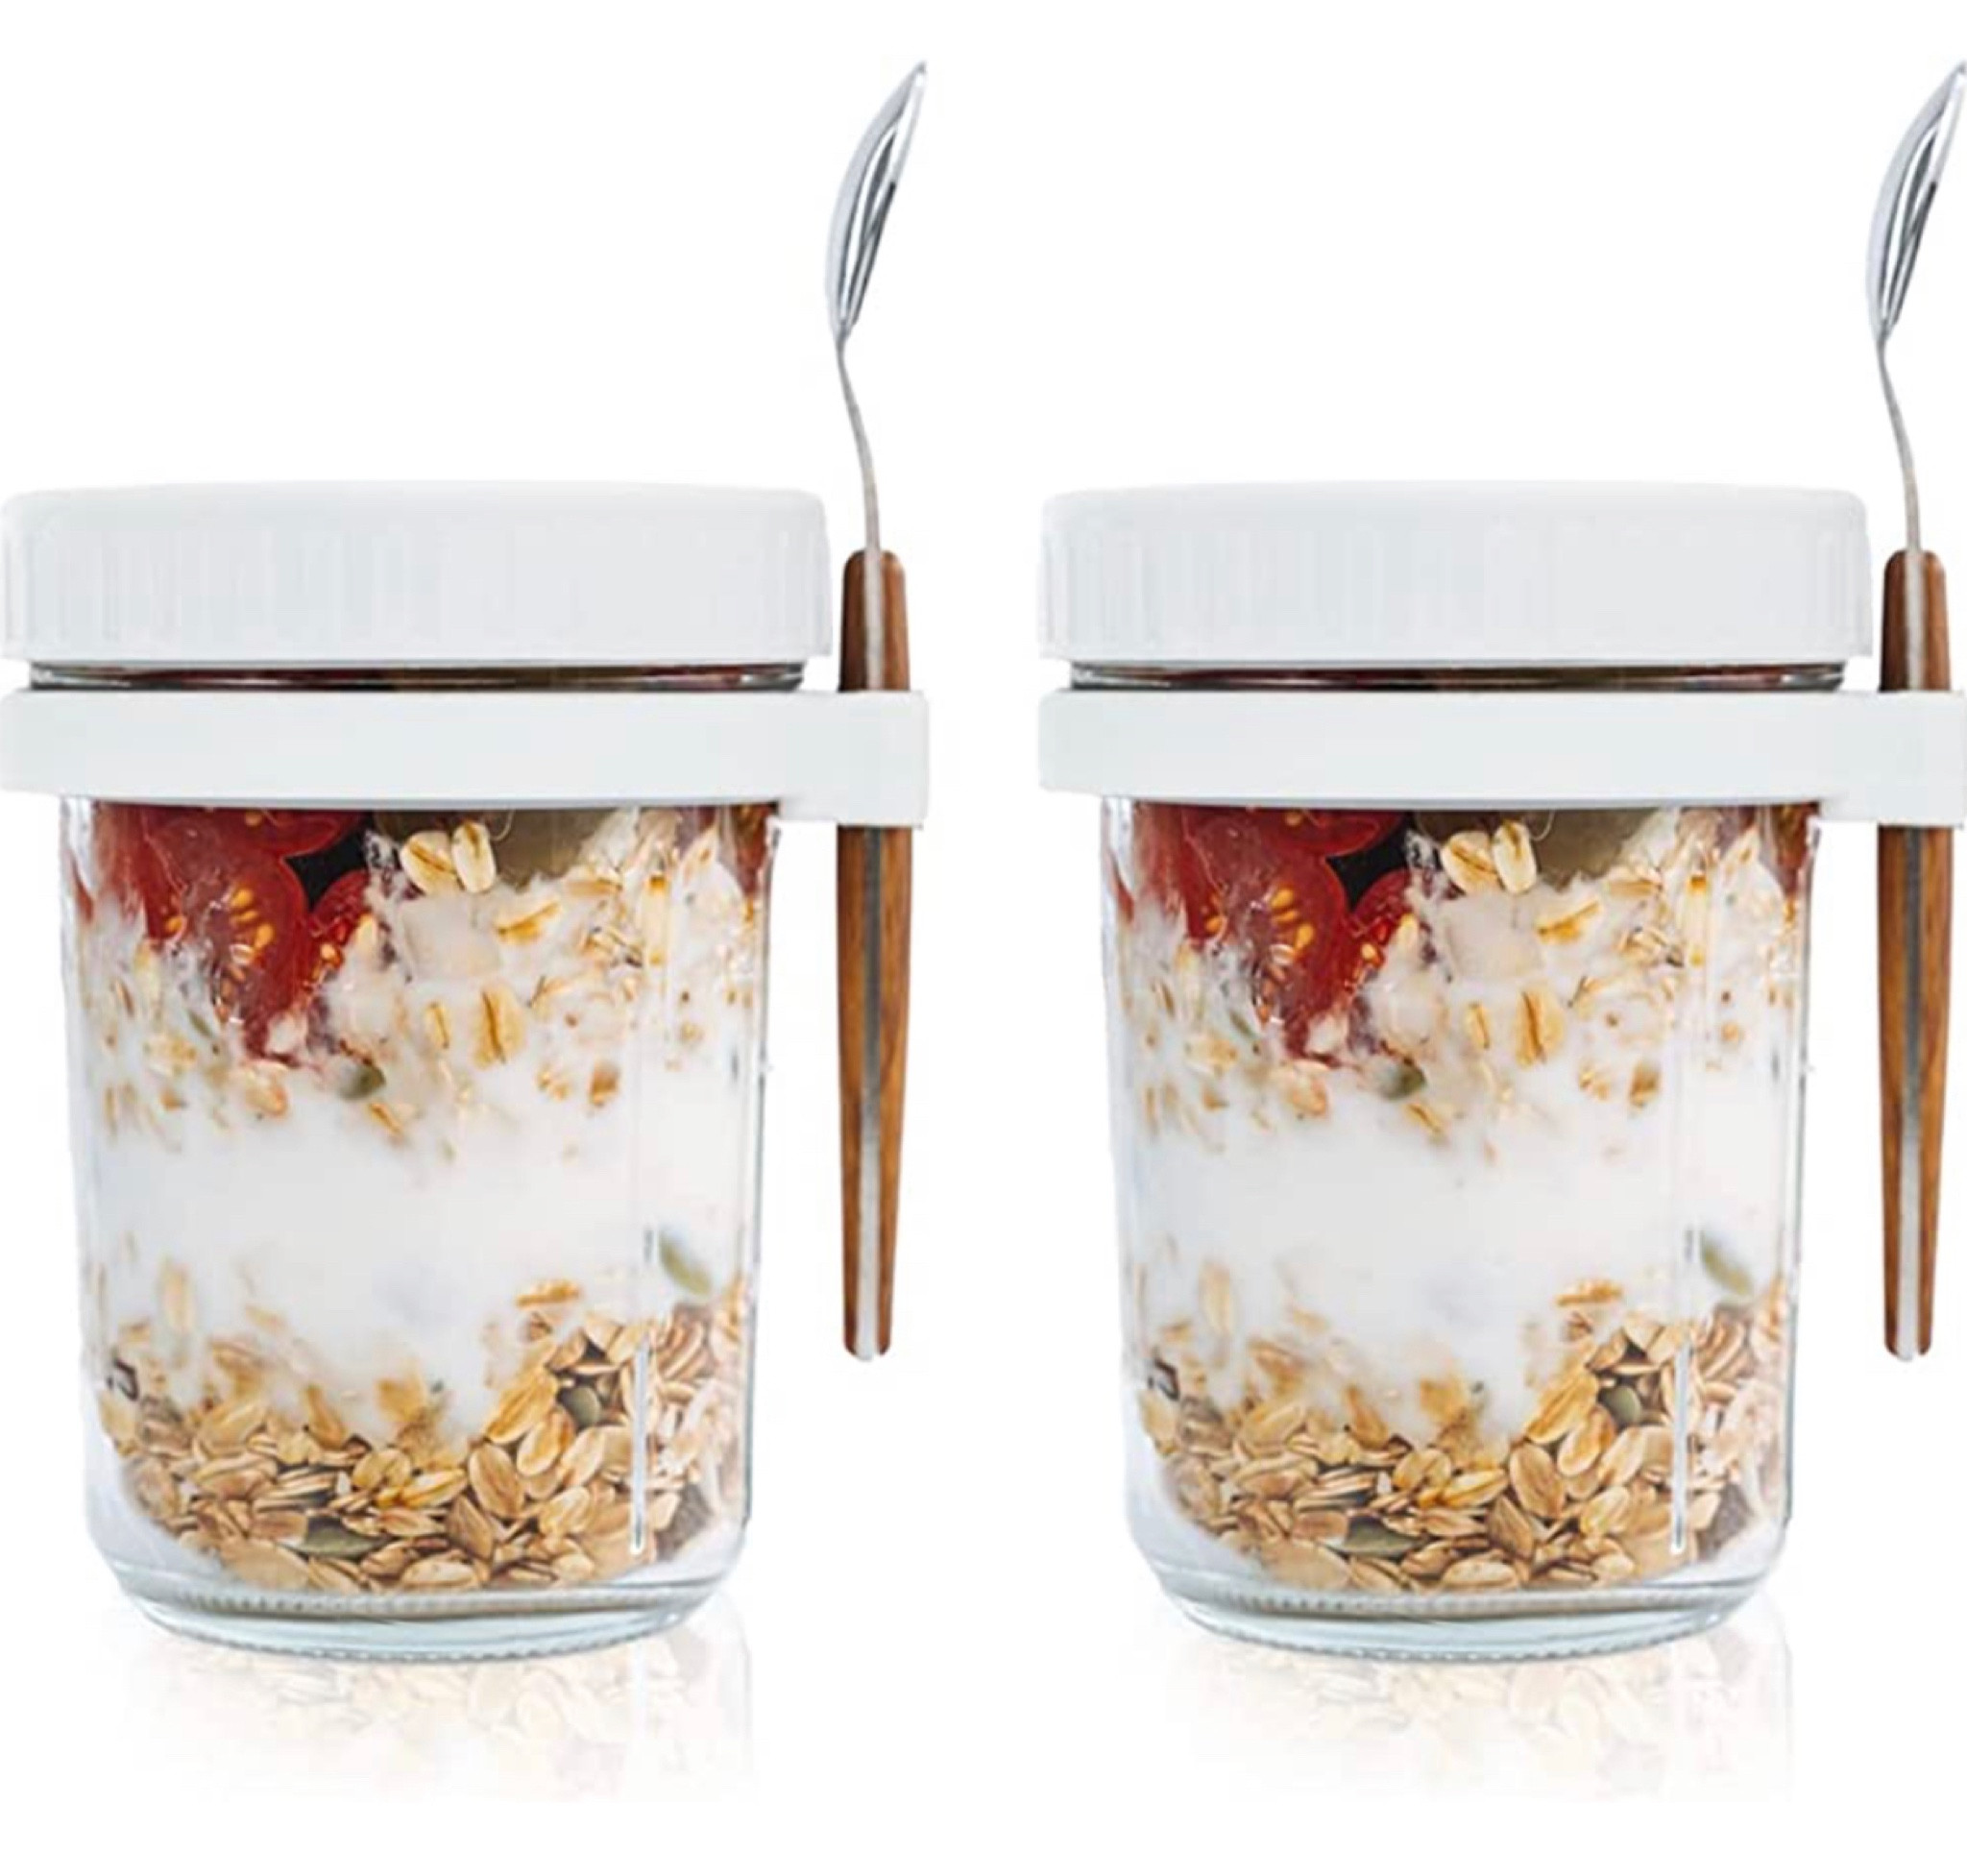 Overnight Oats Jars With Lid And Spoon10 Oz Large Capacity Airtight Oatmeal  Container With Measurement Marks, Mason Jars With Lid For Cereal On The Go